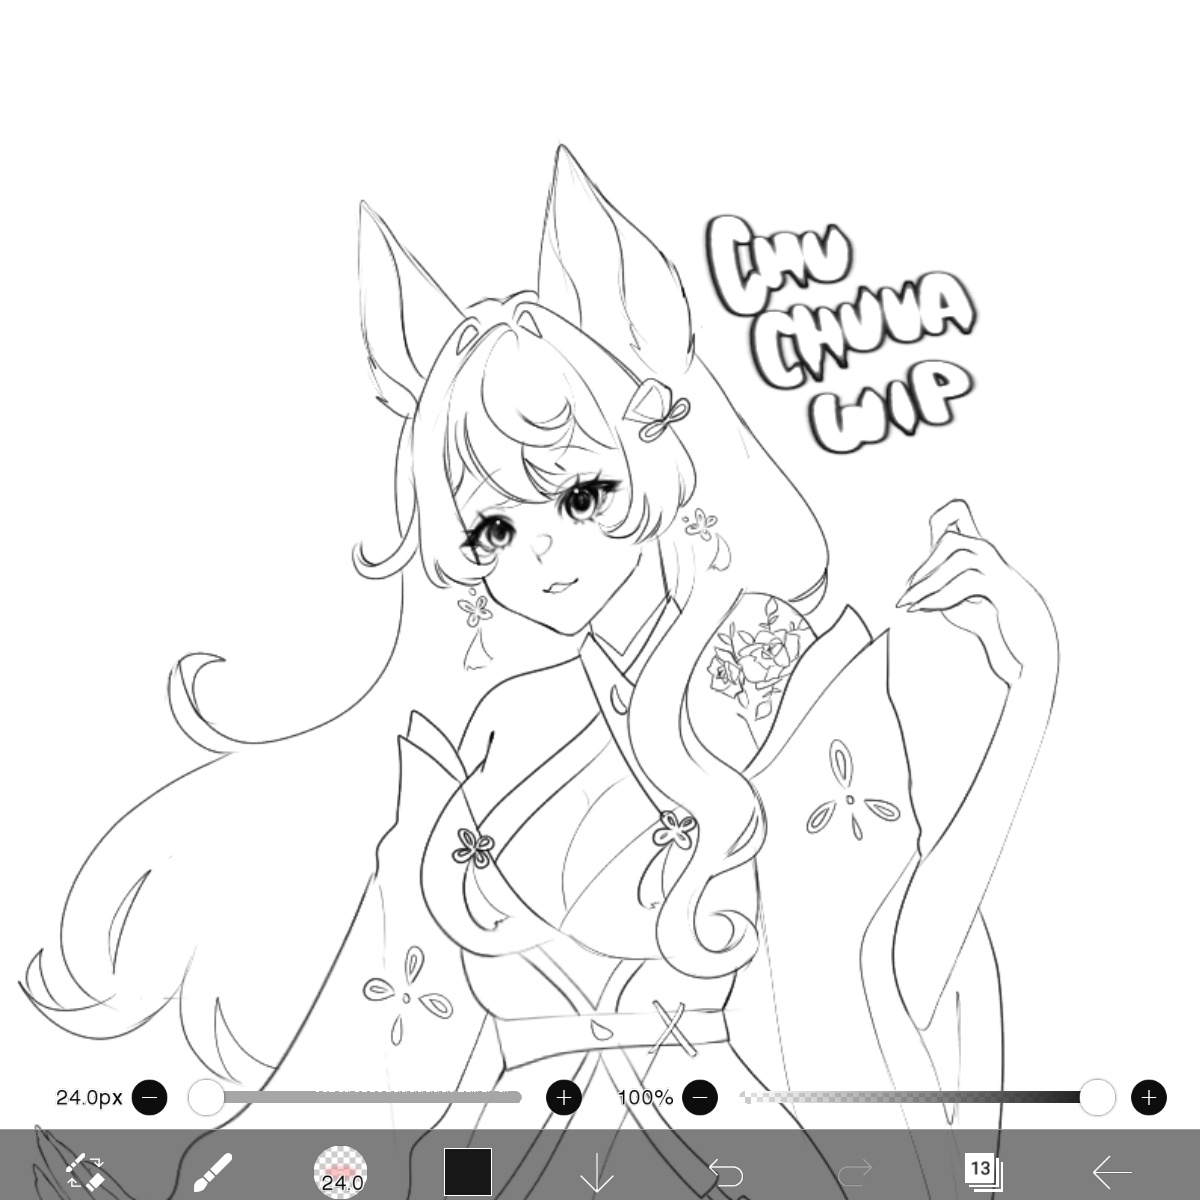 Wip commission 🌸`°.•♡